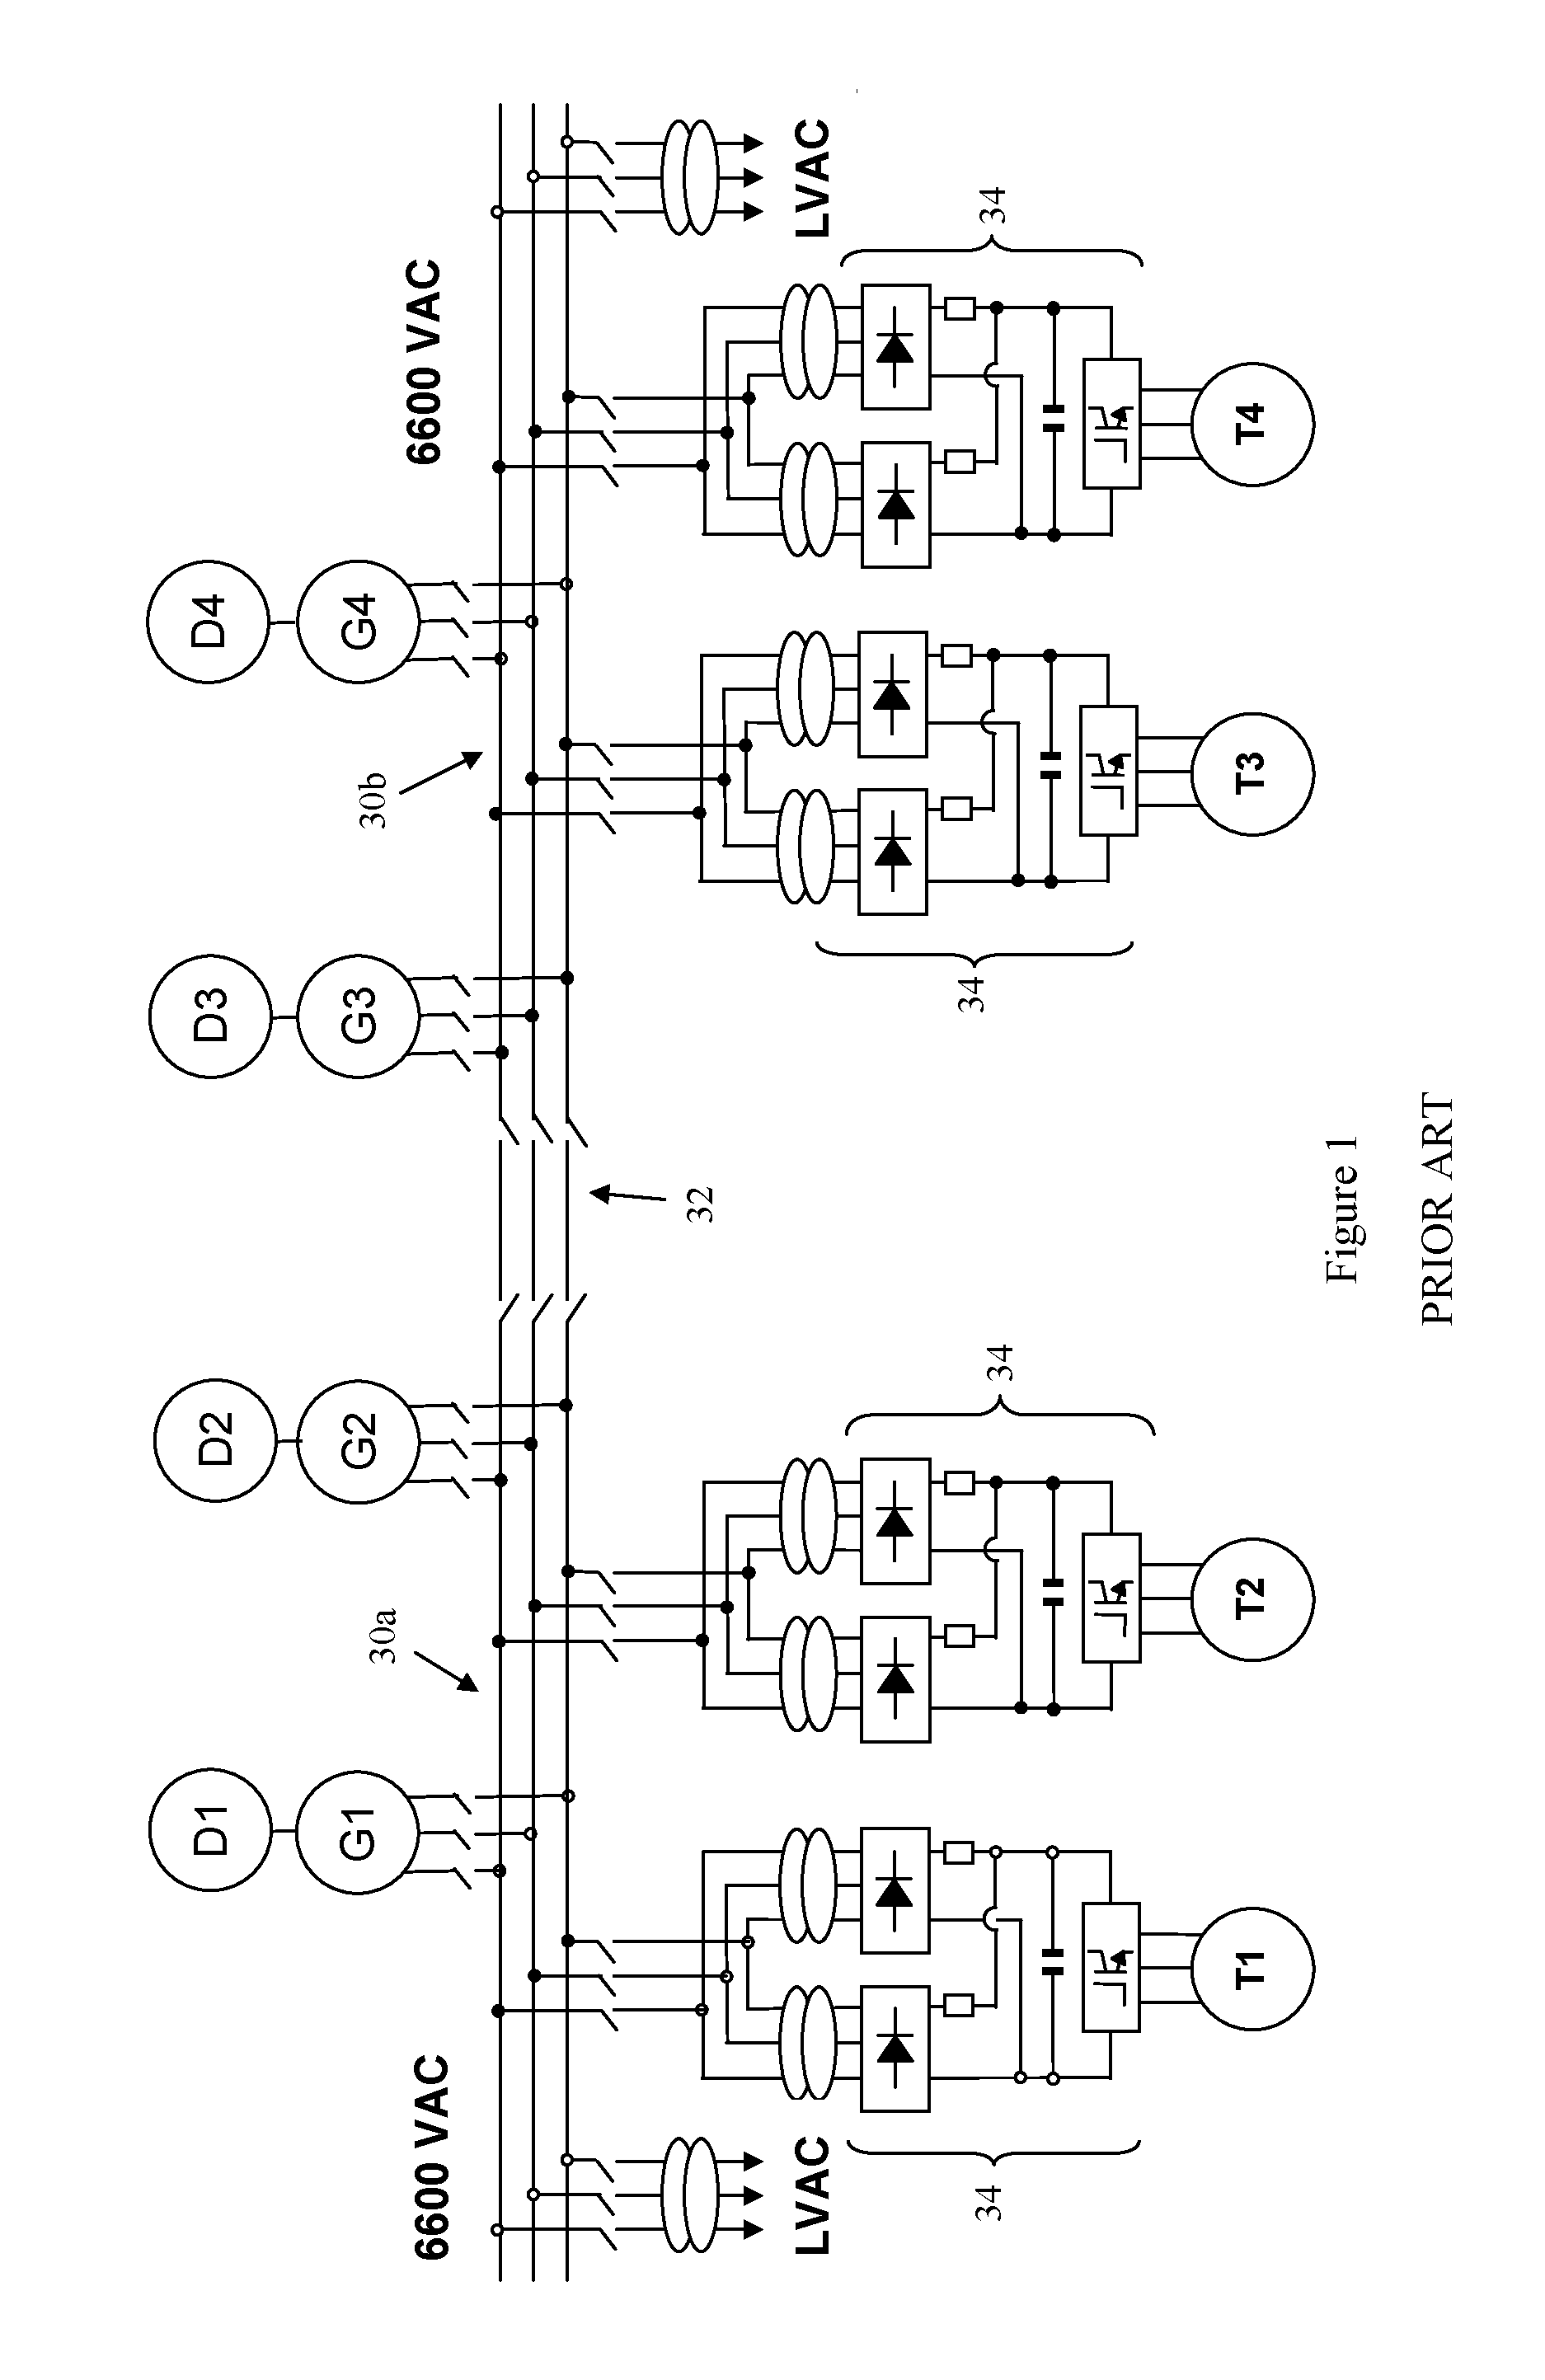 Methods of operating dual fed systems